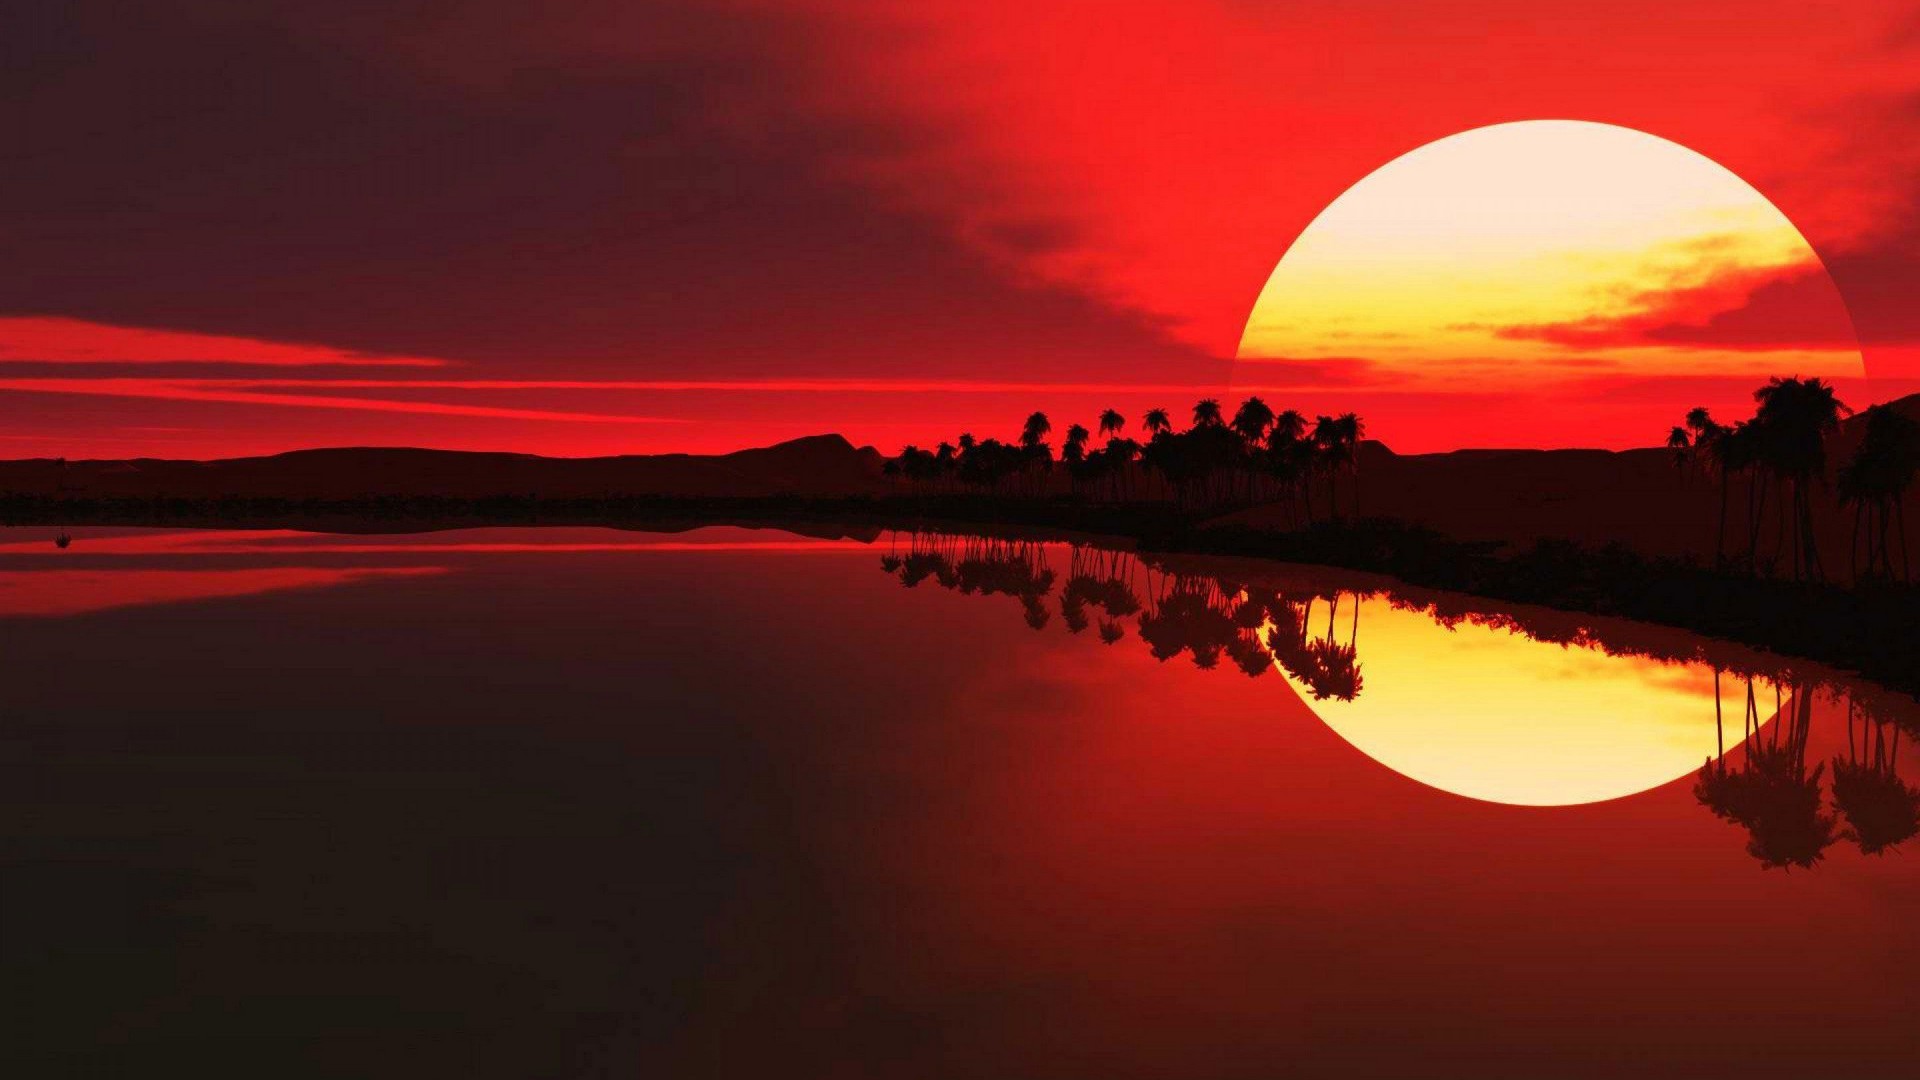 Sunset Time HD Wallpaper With high-resolution 1920X1080 pixel. You can use this wallpaper for your Desktop Computer Backgrounds, Mac Wallpapers, Android Lock screen or iPhone Screensavers and another smartphone device